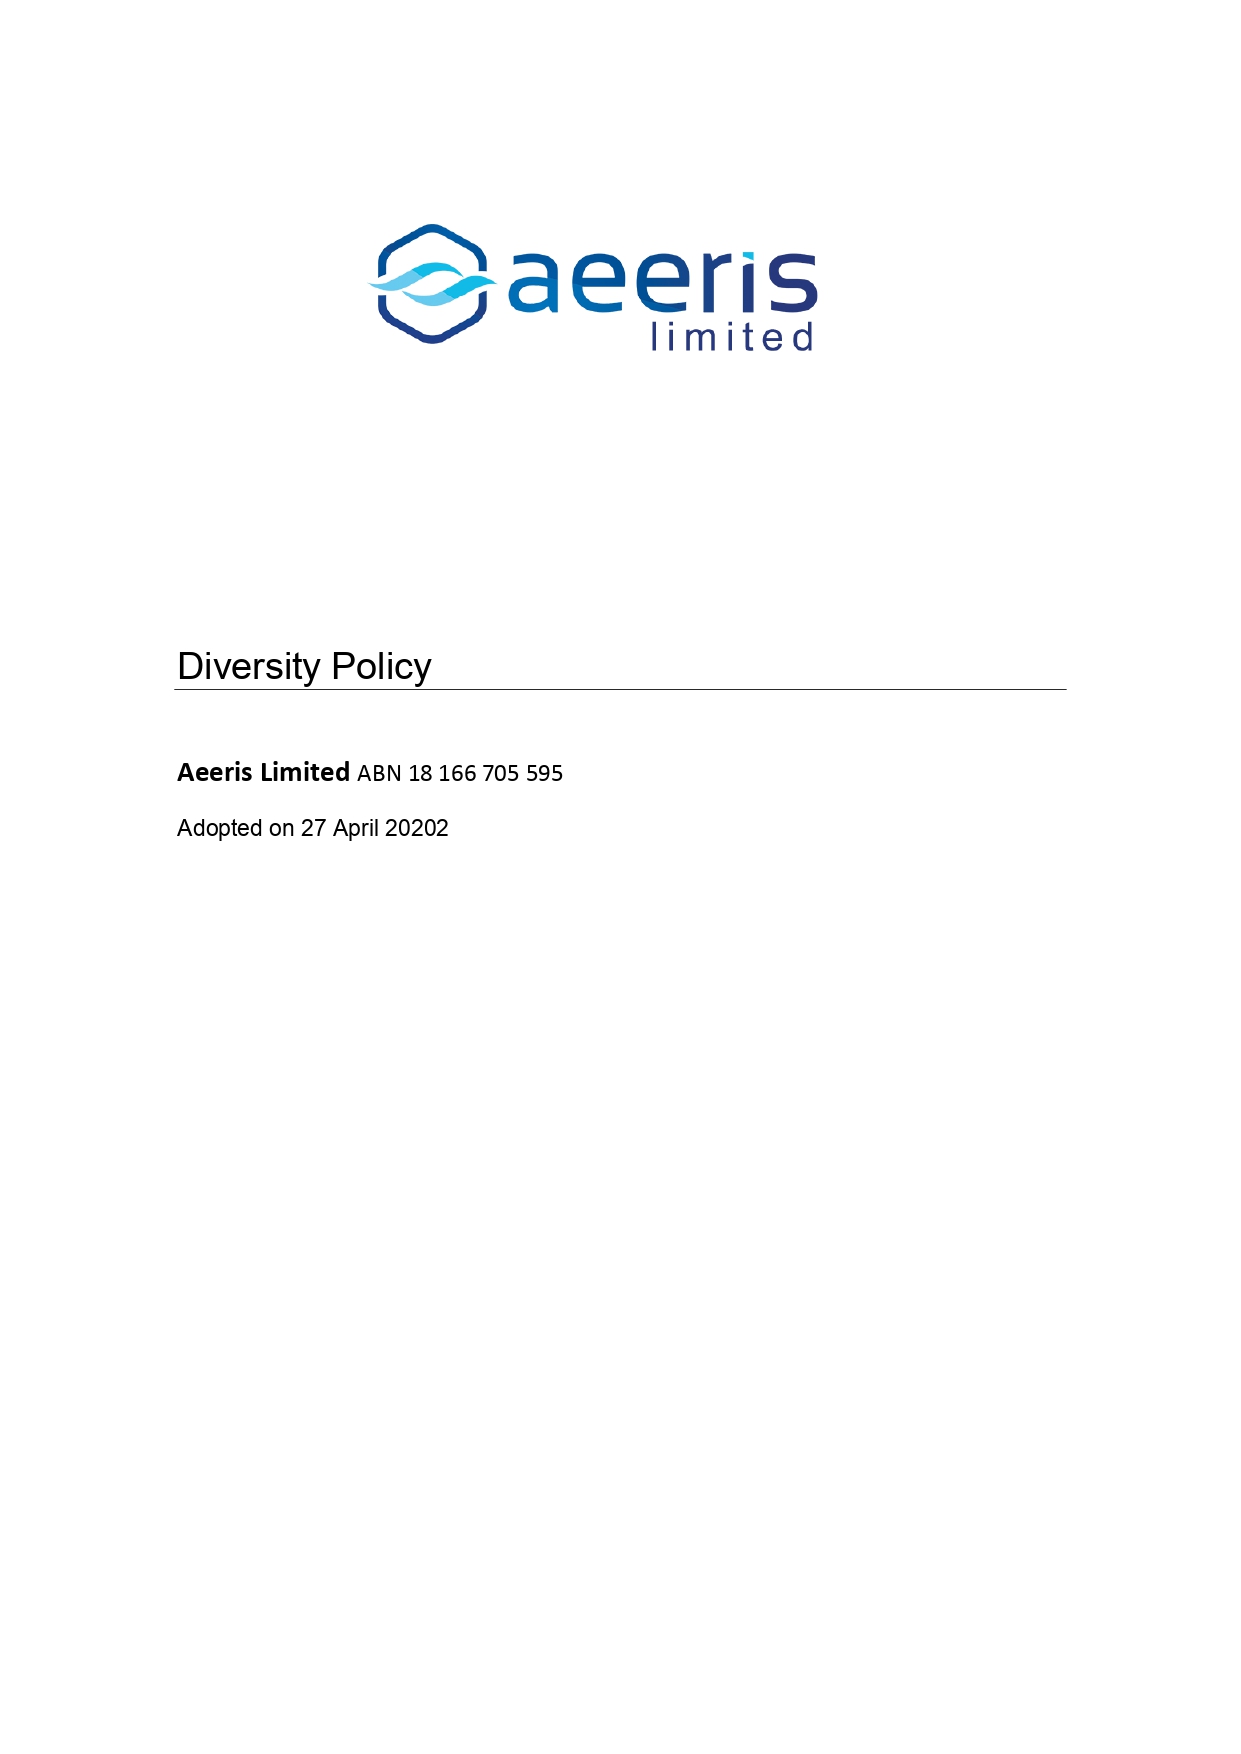 AER Diversity Policy